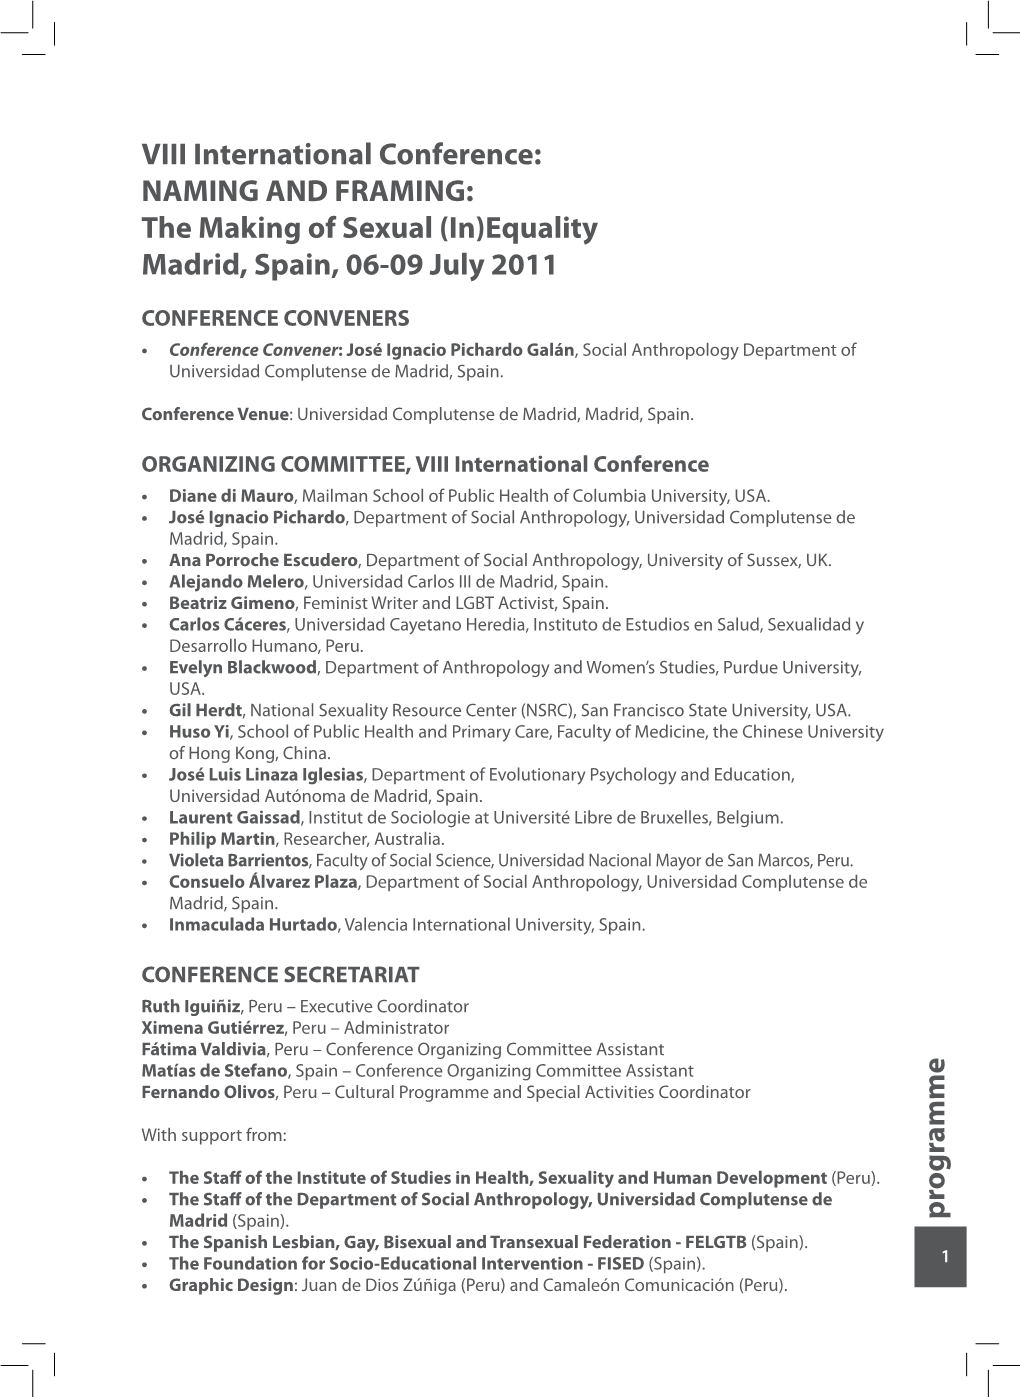 VIII International Conference: NAMING and FRAMING: the Making of Sexual (In)Equality Madrid, Spain, 06-09 July 2011